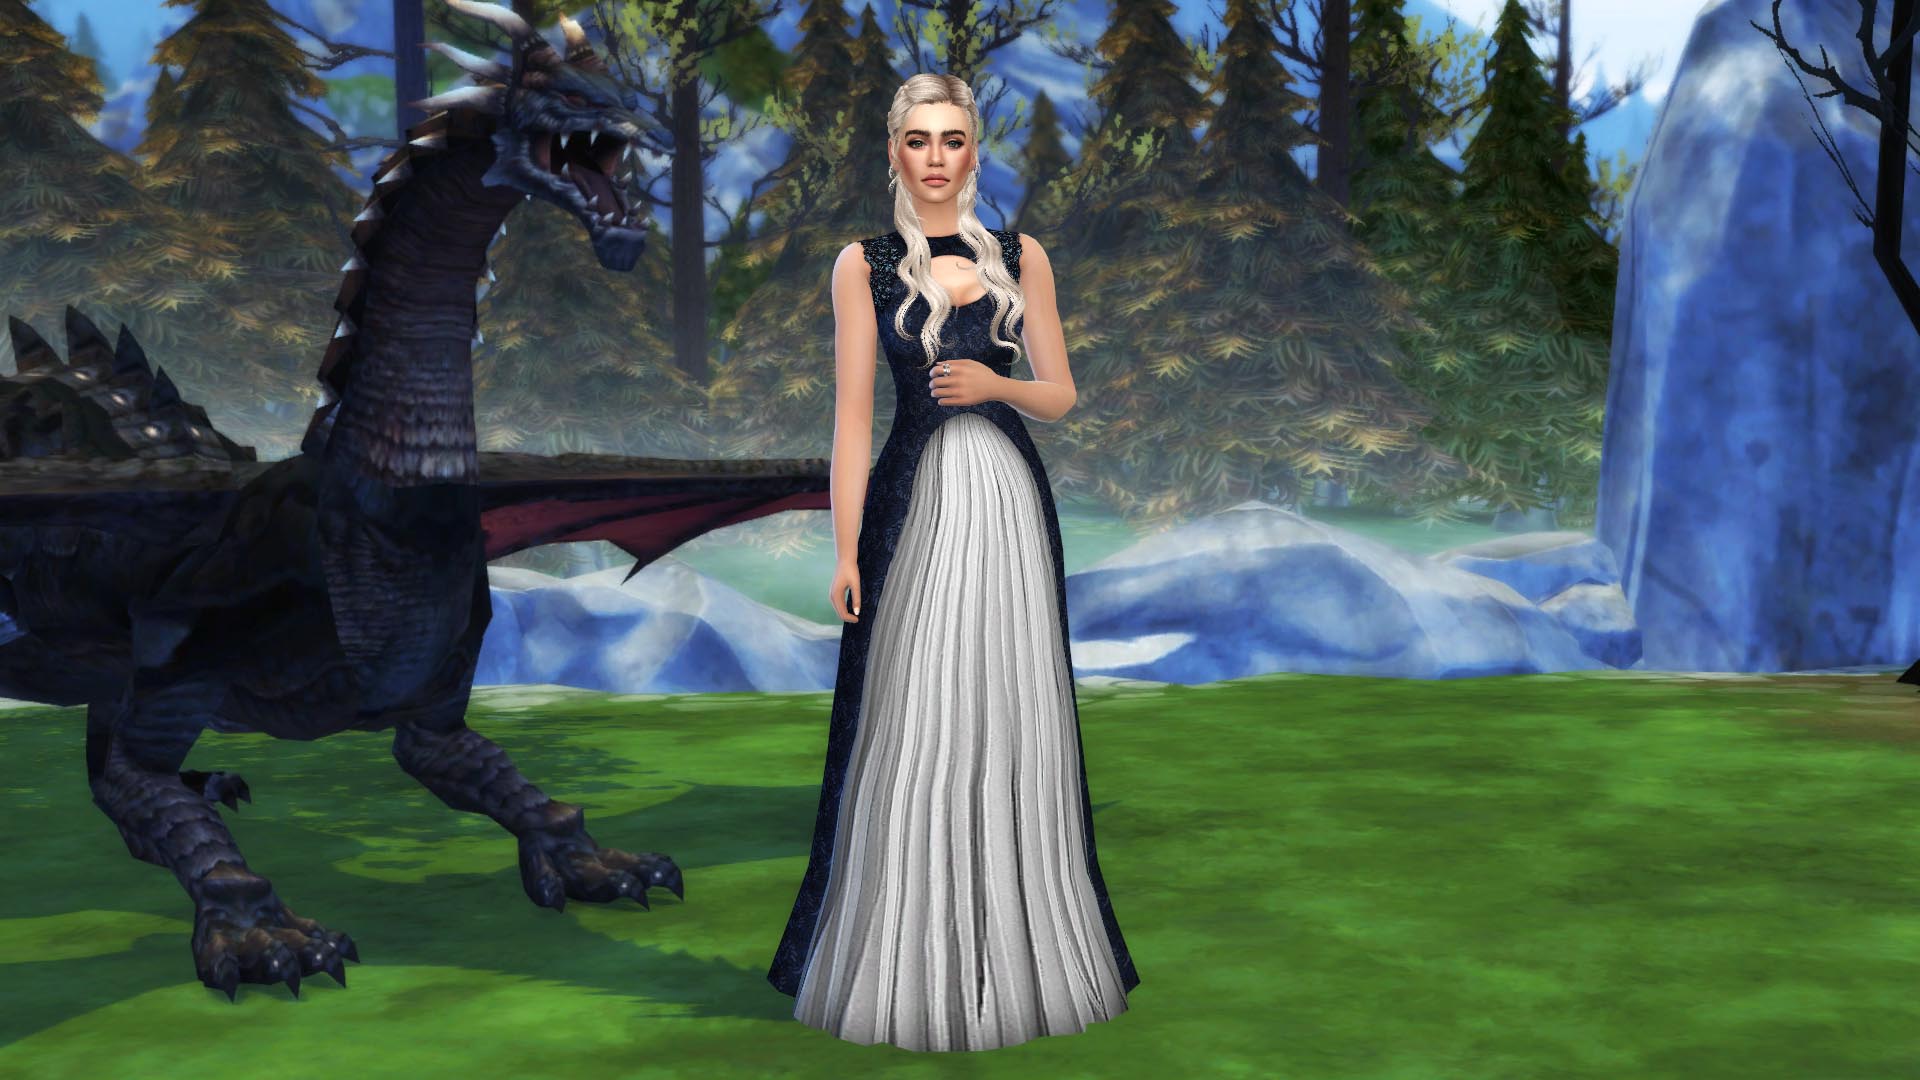 Sims 4 game of thrones dress